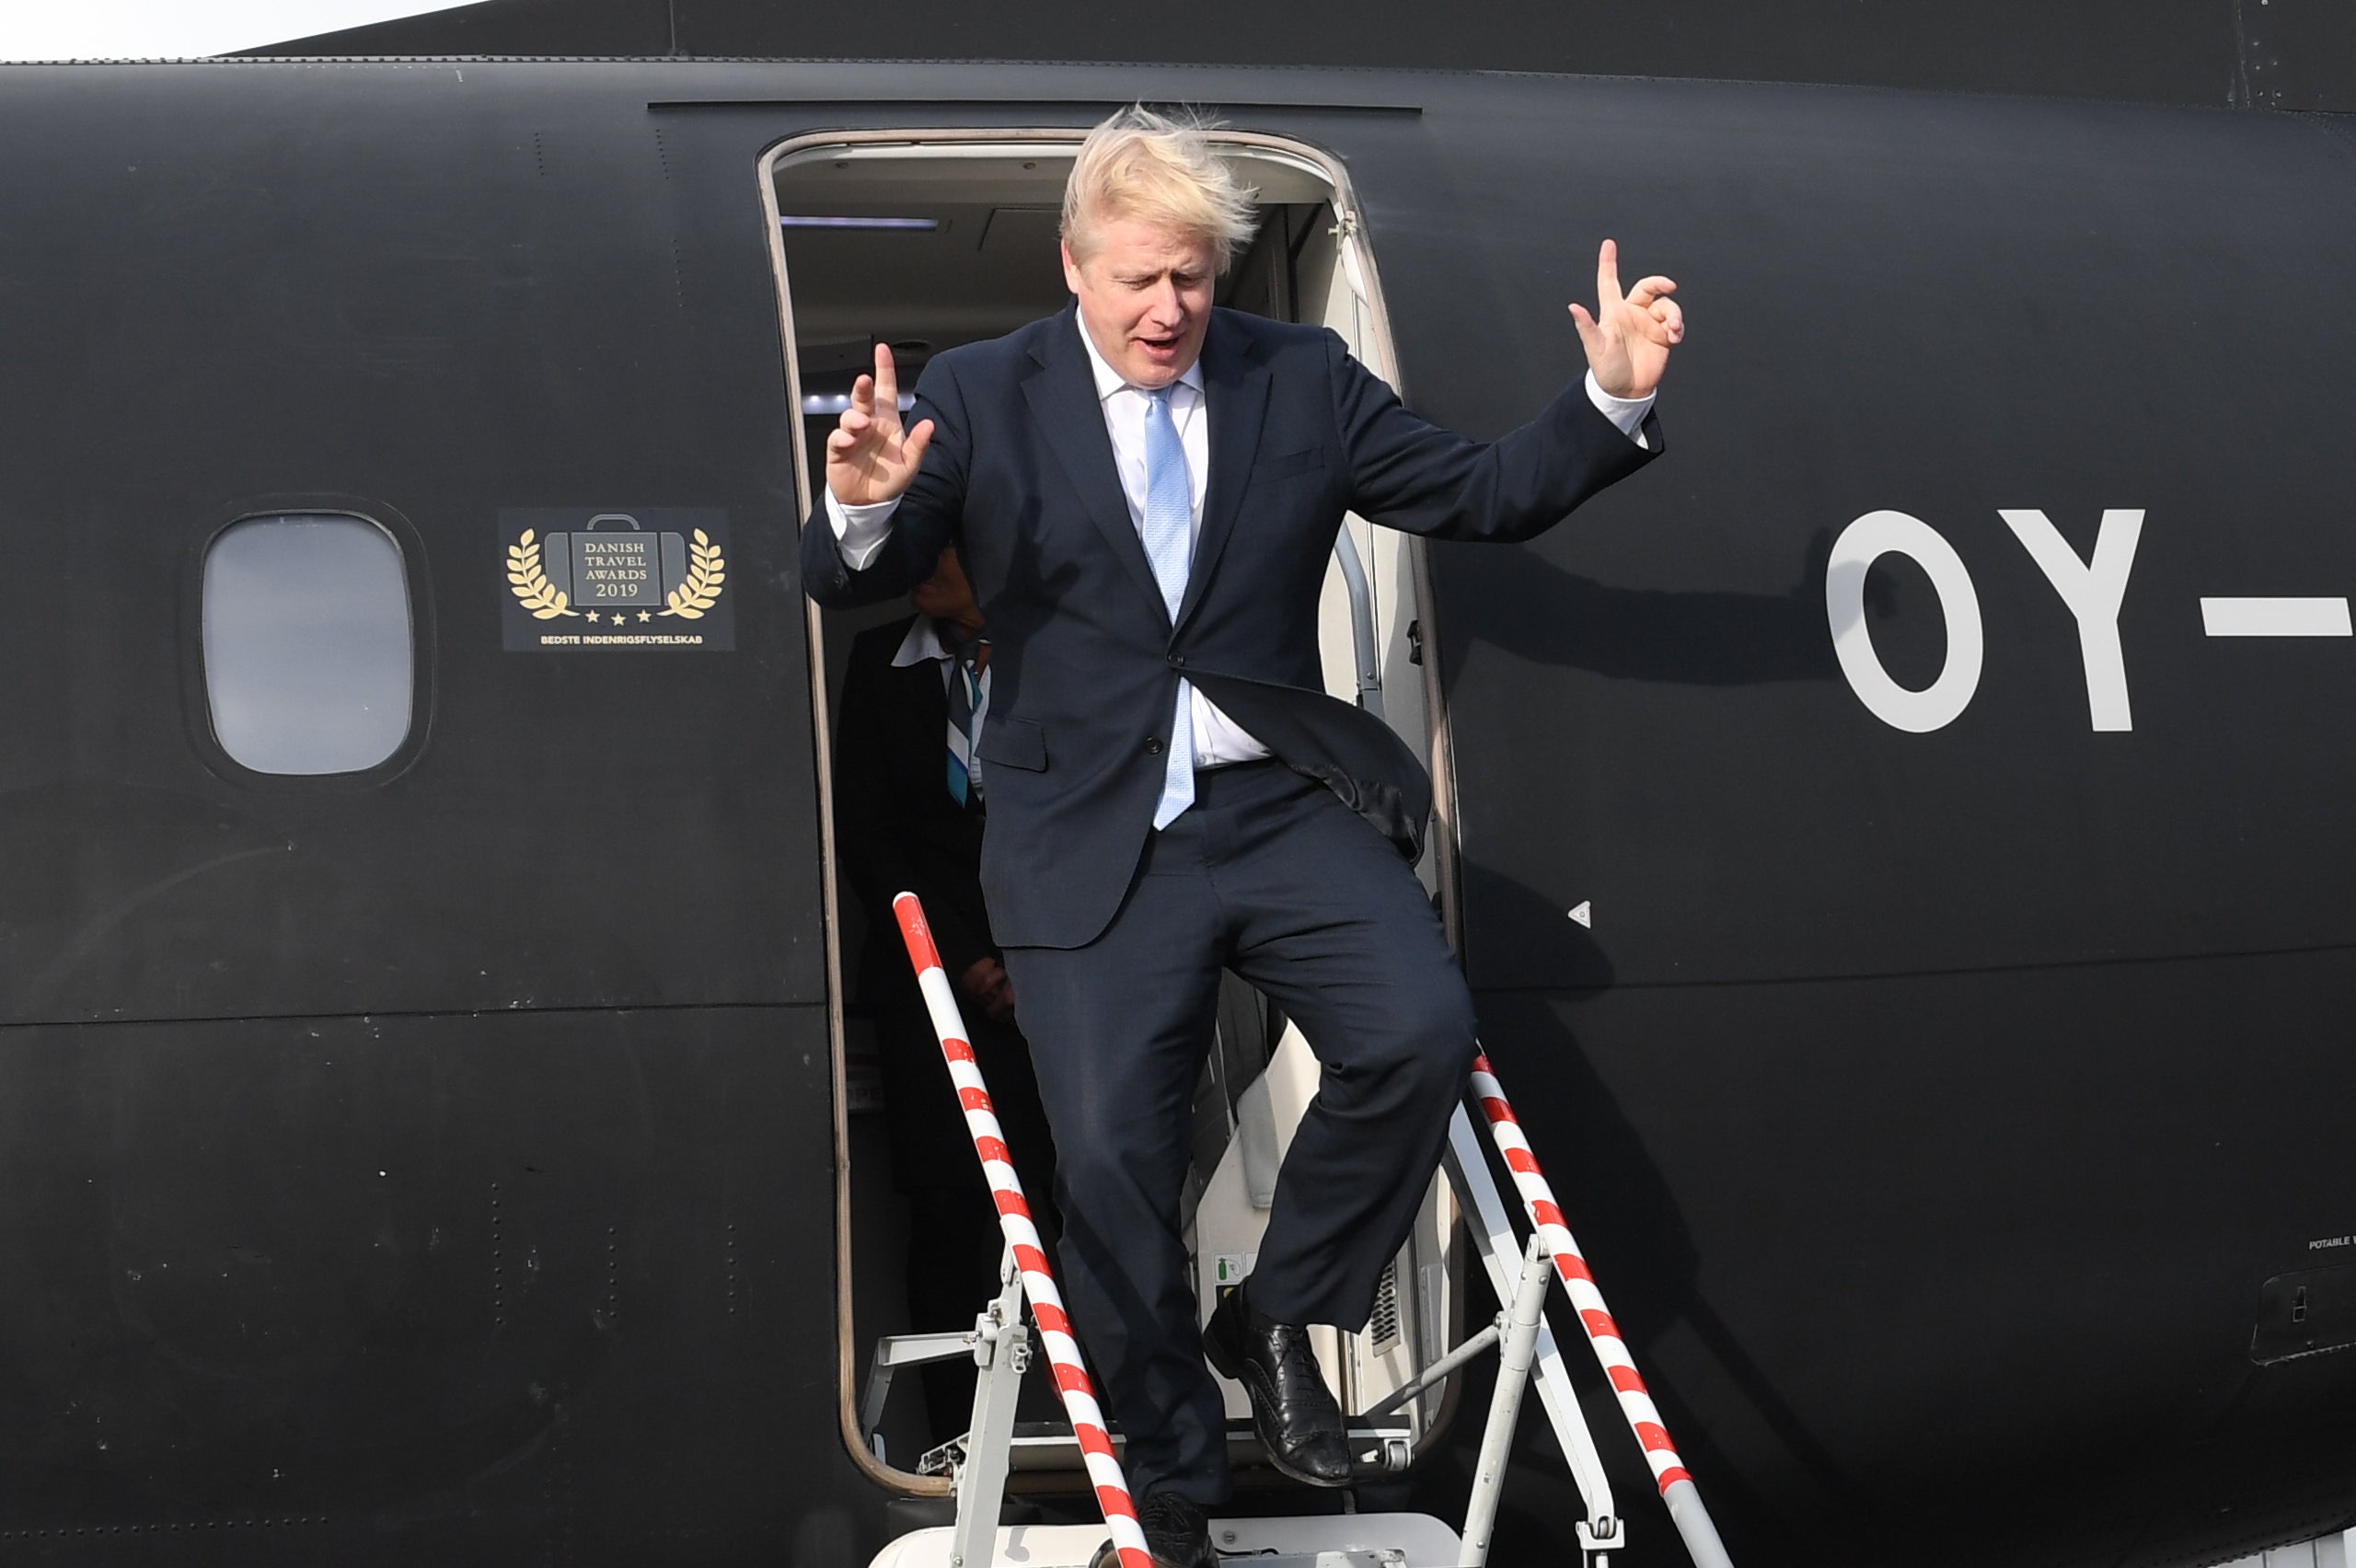 Boris Johnson arrives at Cardiff airport during the 2019 general electiono campaign